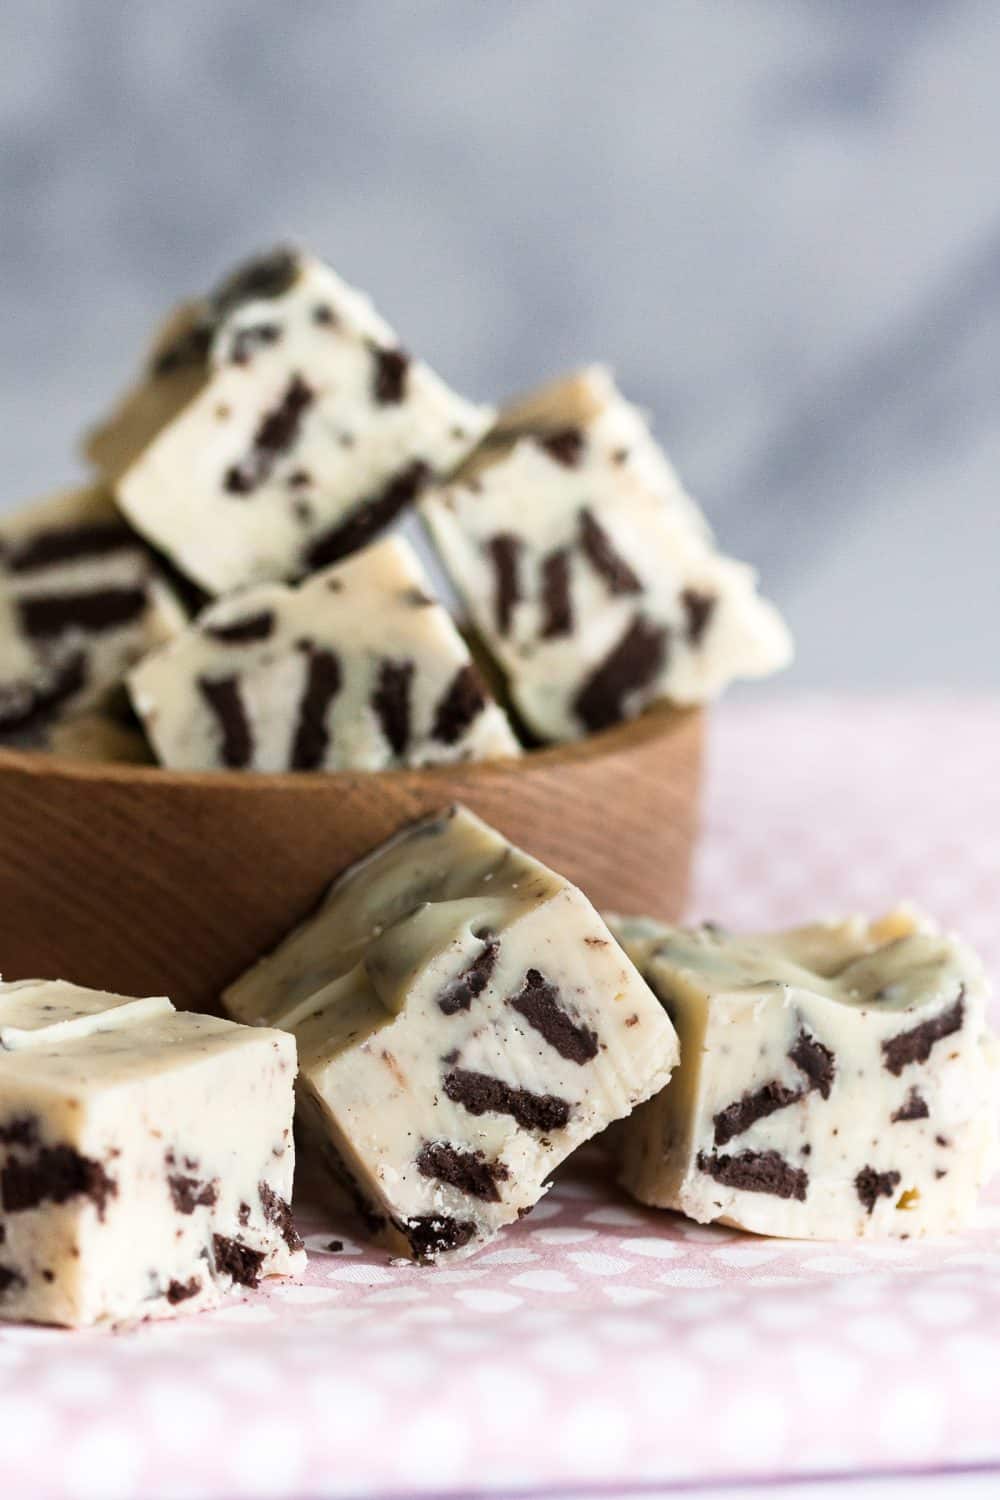 With just 4 ingredients and a few minutes, you can whip up this crowd-pleasing easy cookies and cream fudge! This easy fudge recipe is perfect for parties or a sweet edible gift. * GoodieGodmother.com